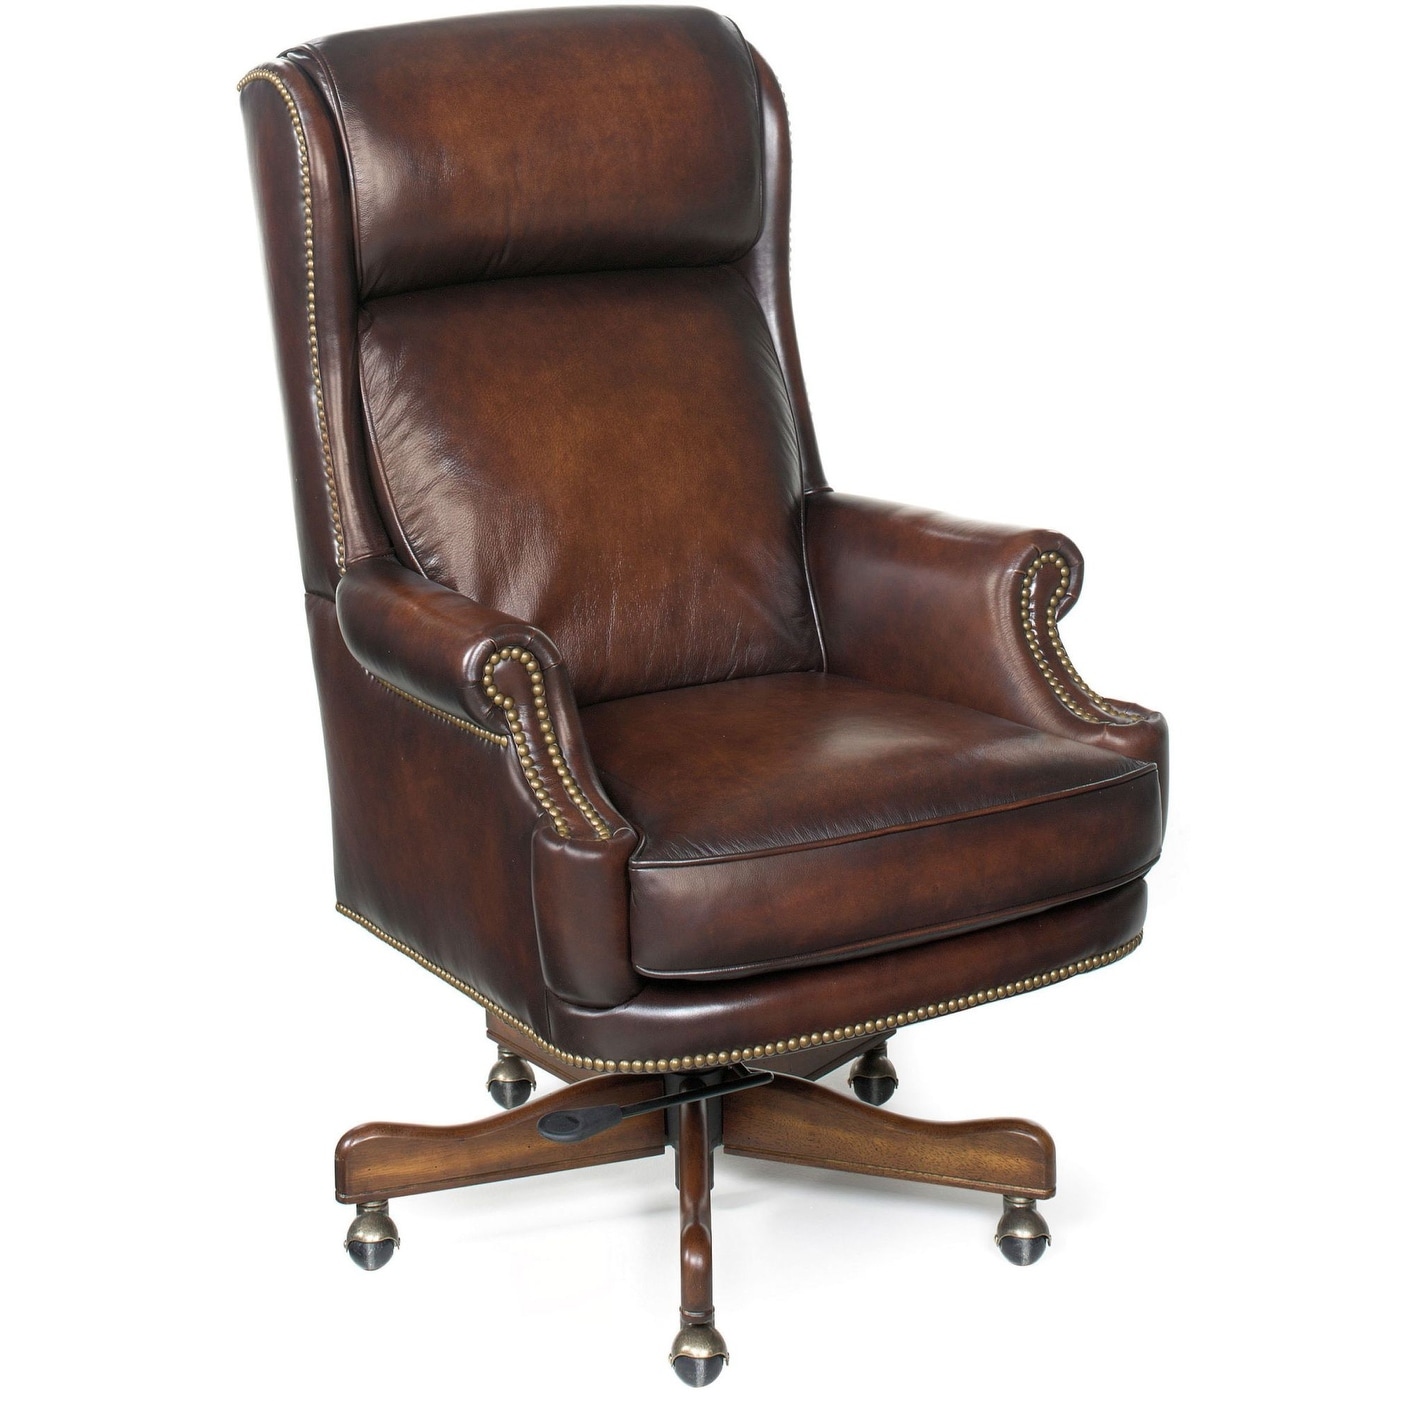 hooker furniture ec293 adjustable height leather office chair from the   james river brown